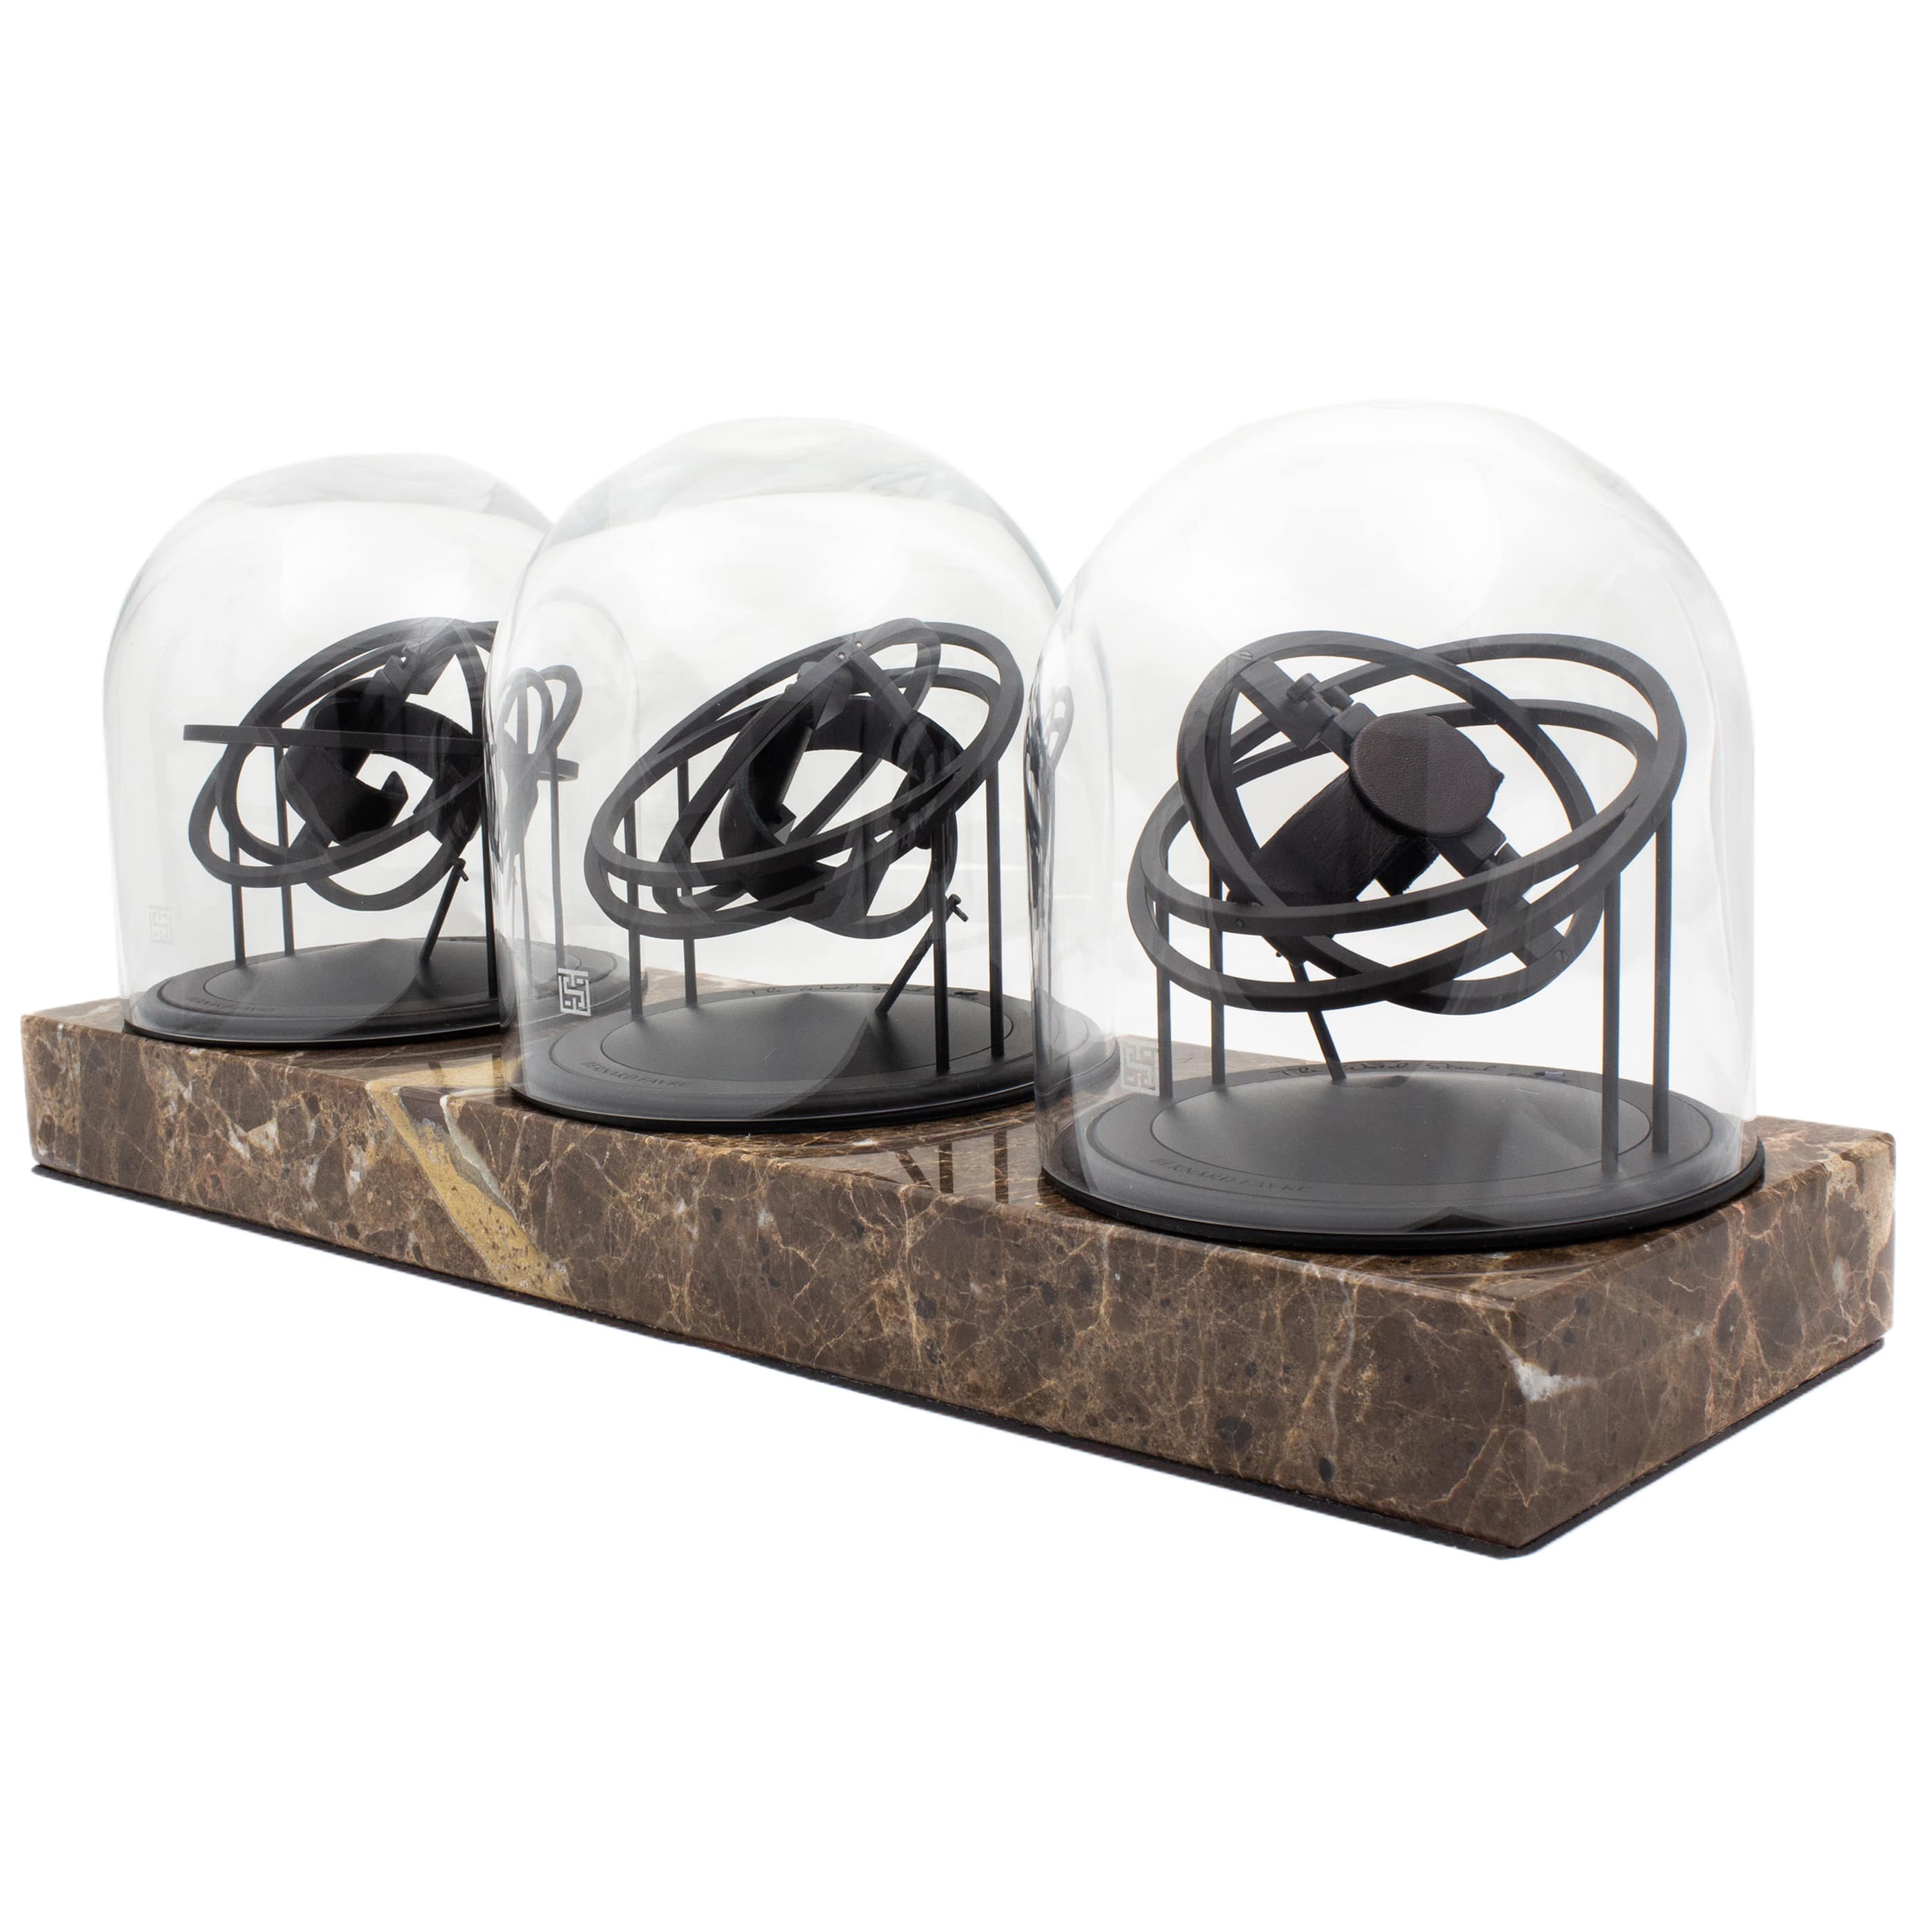 WATCH WINDER - THREE PLANET DOUBLE AXIS - BROWN